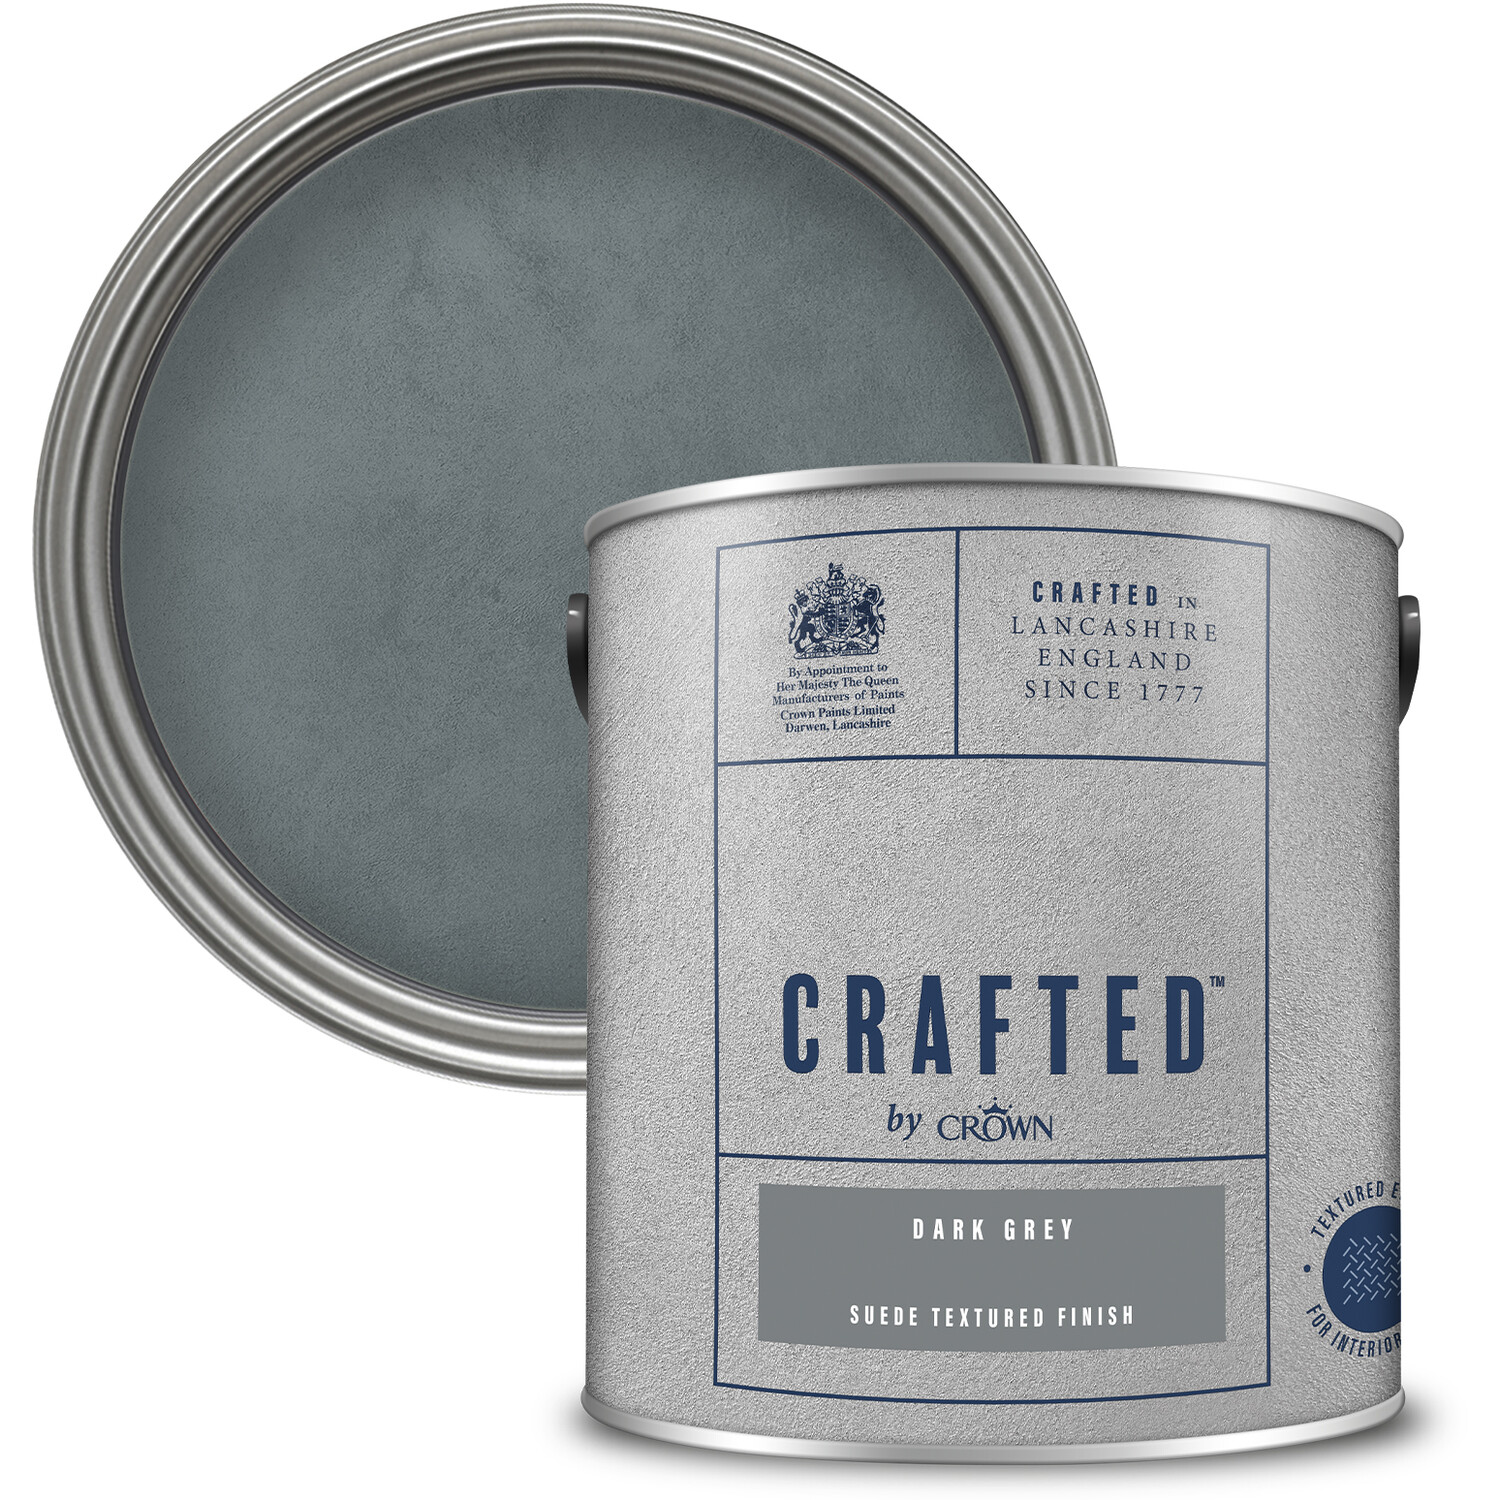 Crown Crafted Walls Dark Grey Suede Textured Finish Paint 2.5L Image 1